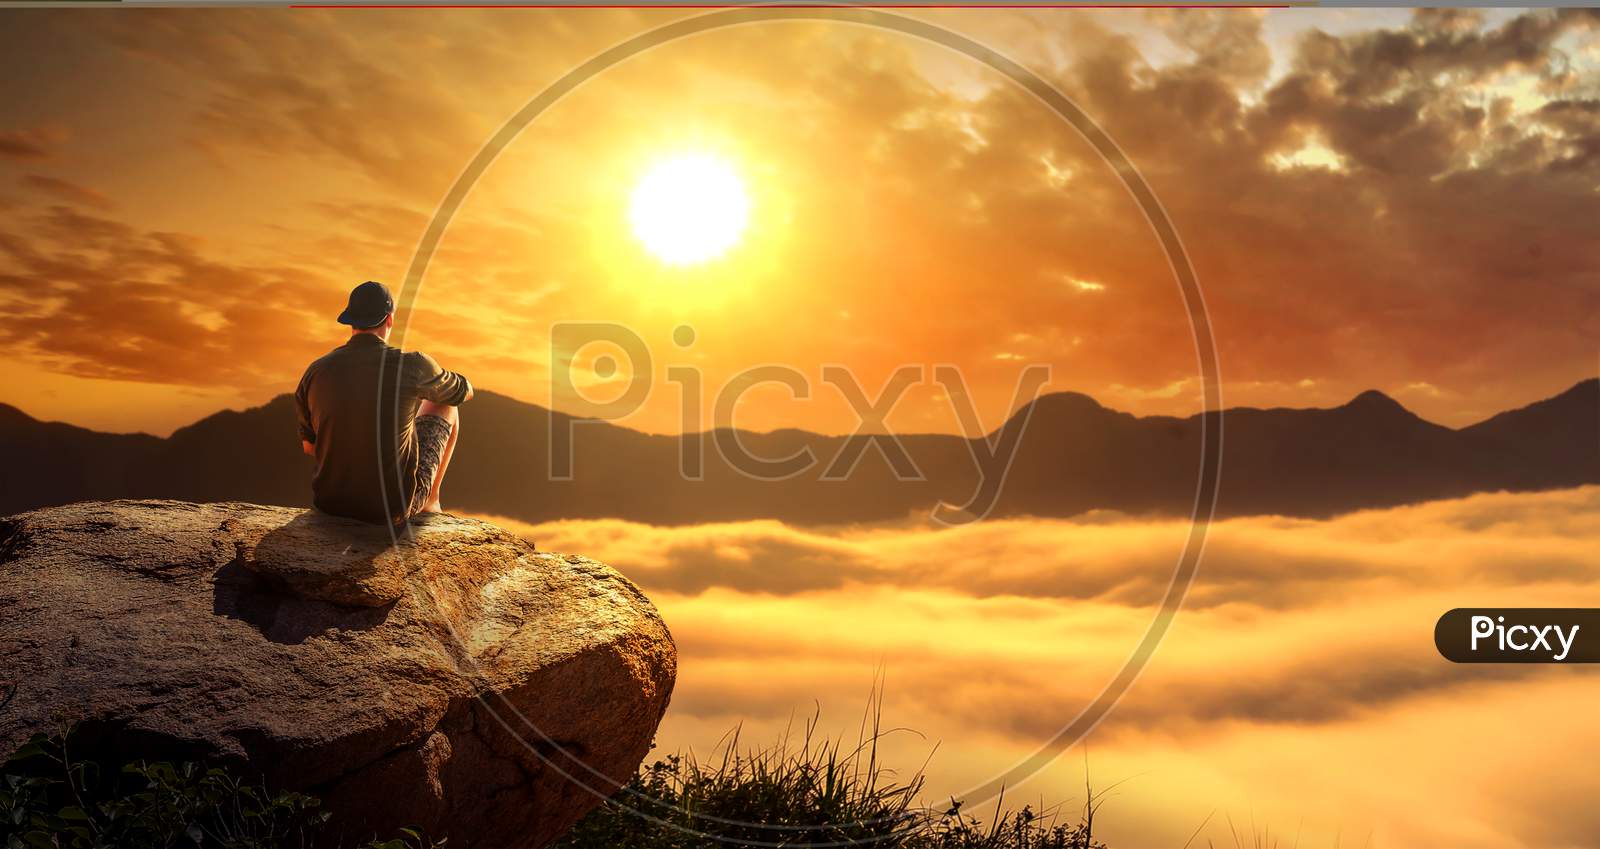 A Man Sitting On The Big Rock On A Cliff And Enjoying The Foggy Morning Sunrise In Mountains.